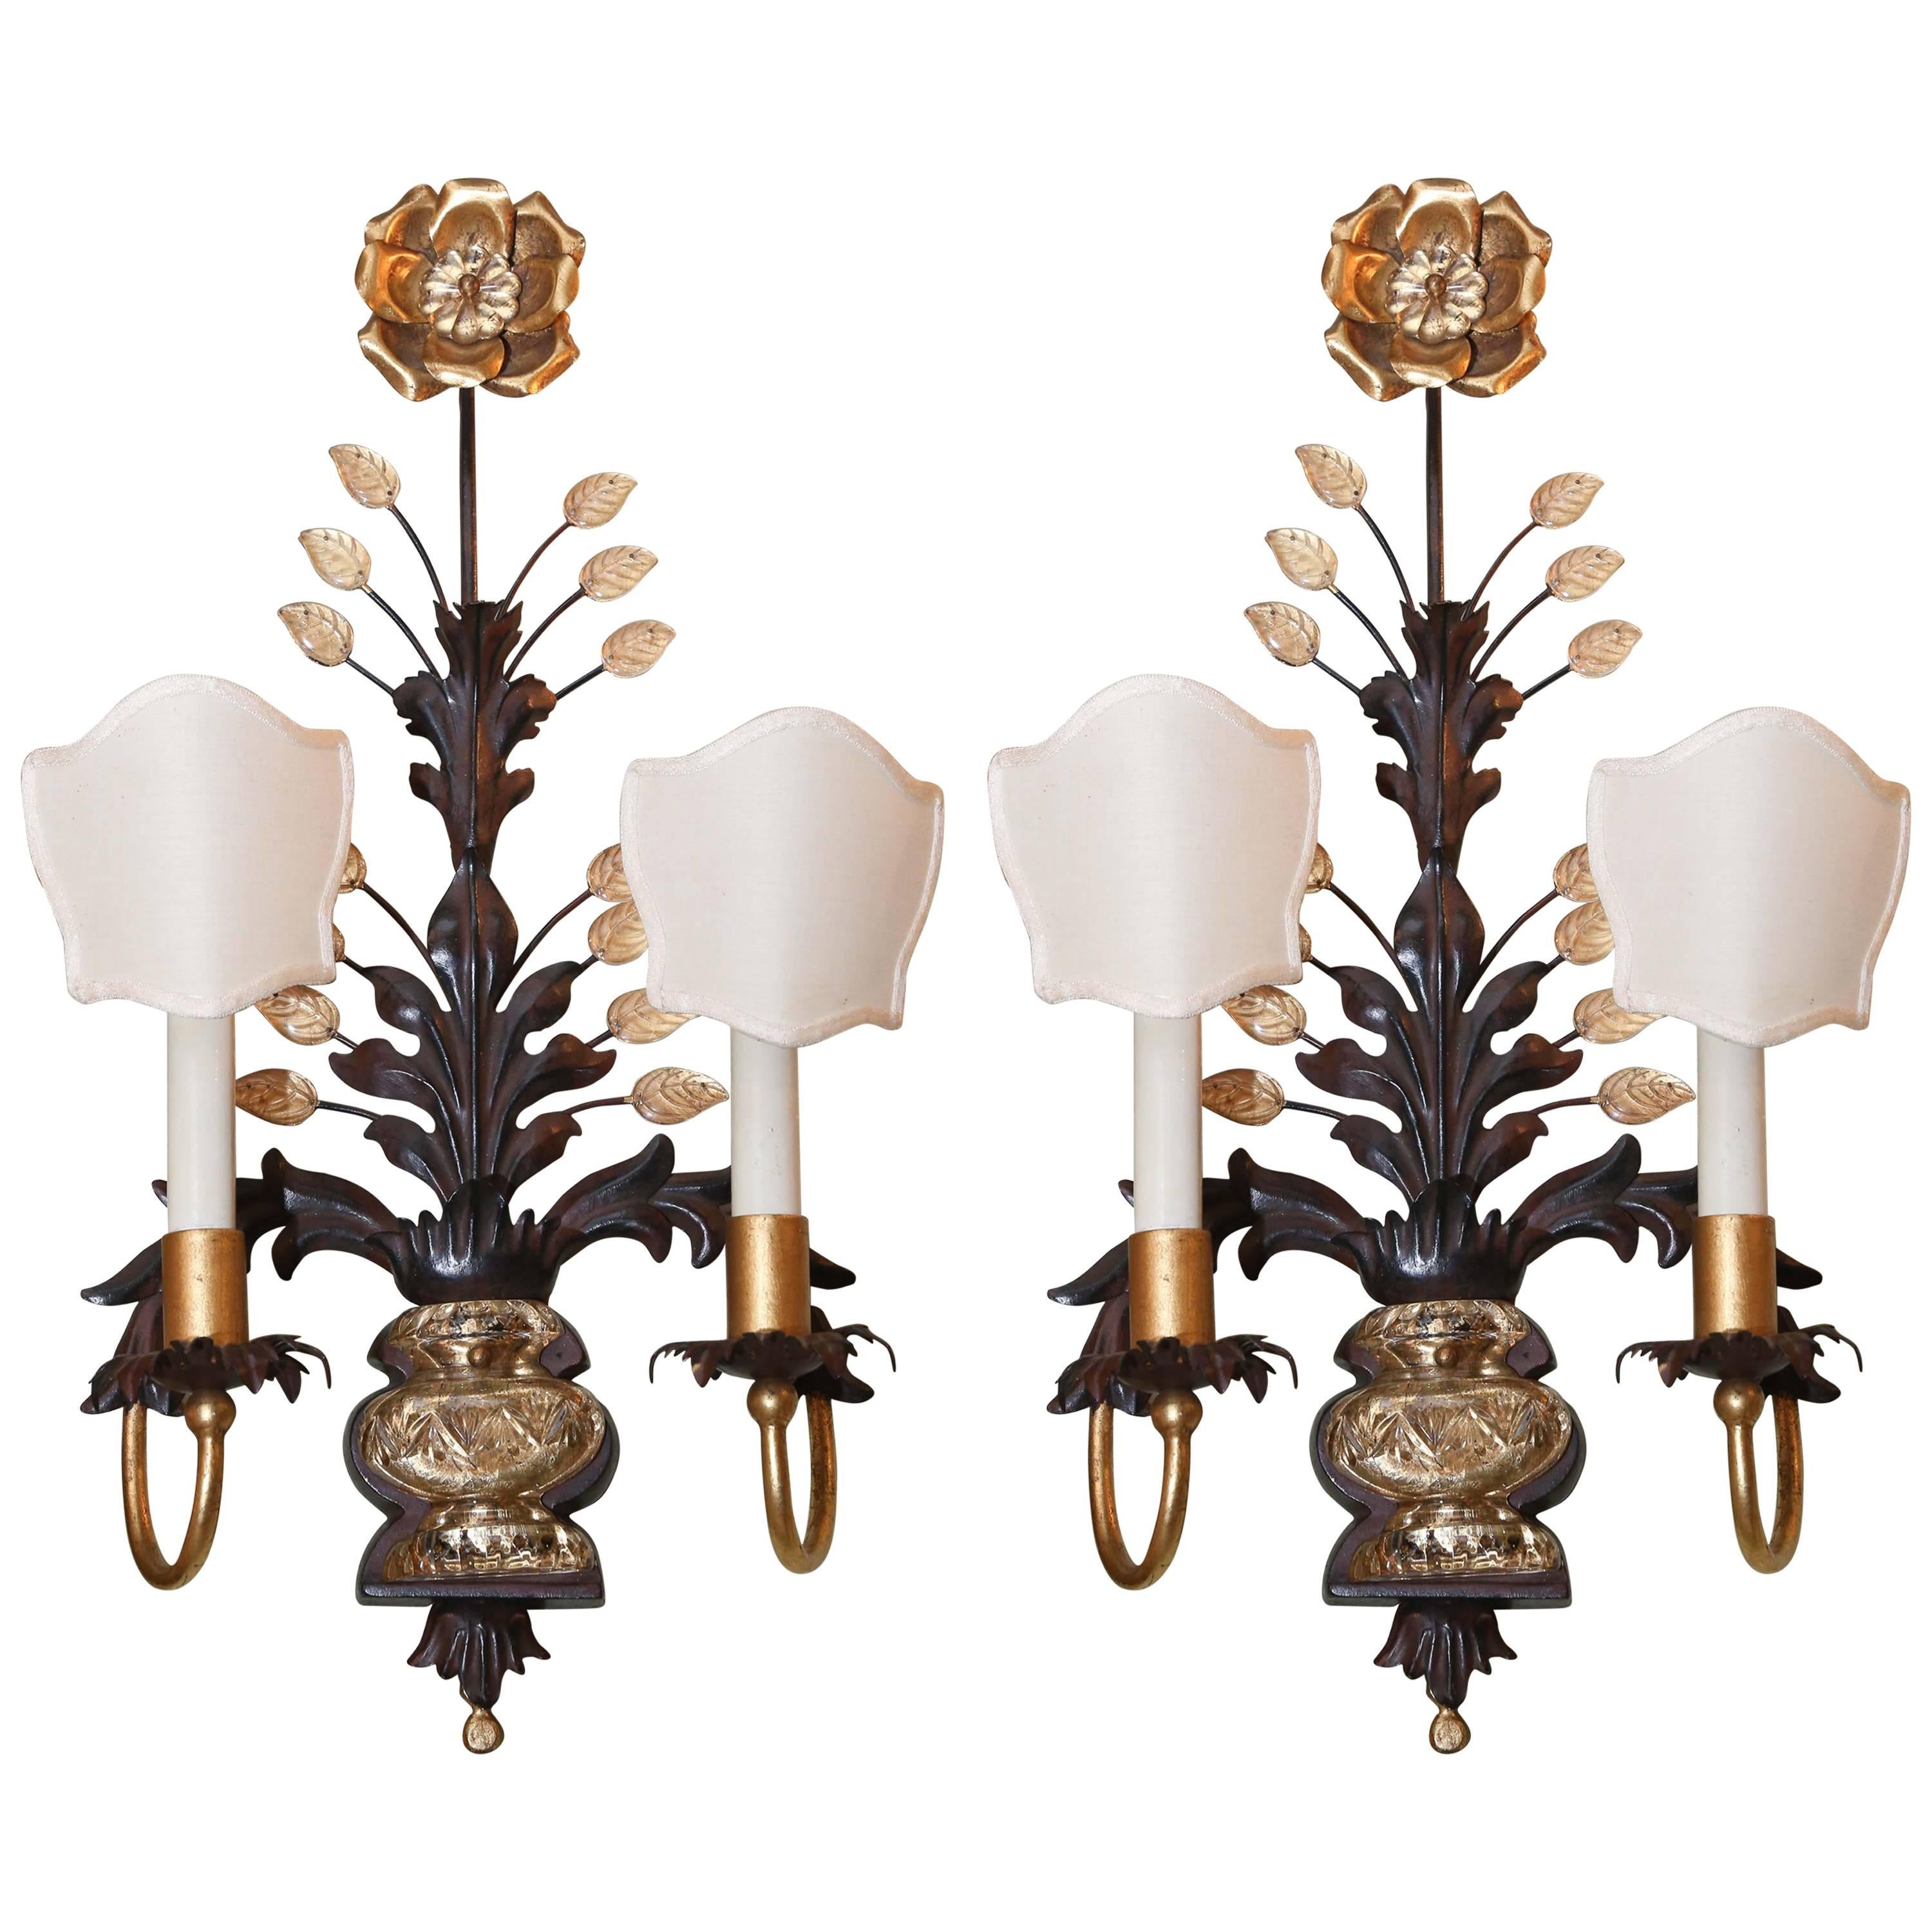 Pair of Wall Sconces with Two Lights, circa 1930, style of Maison Baguès